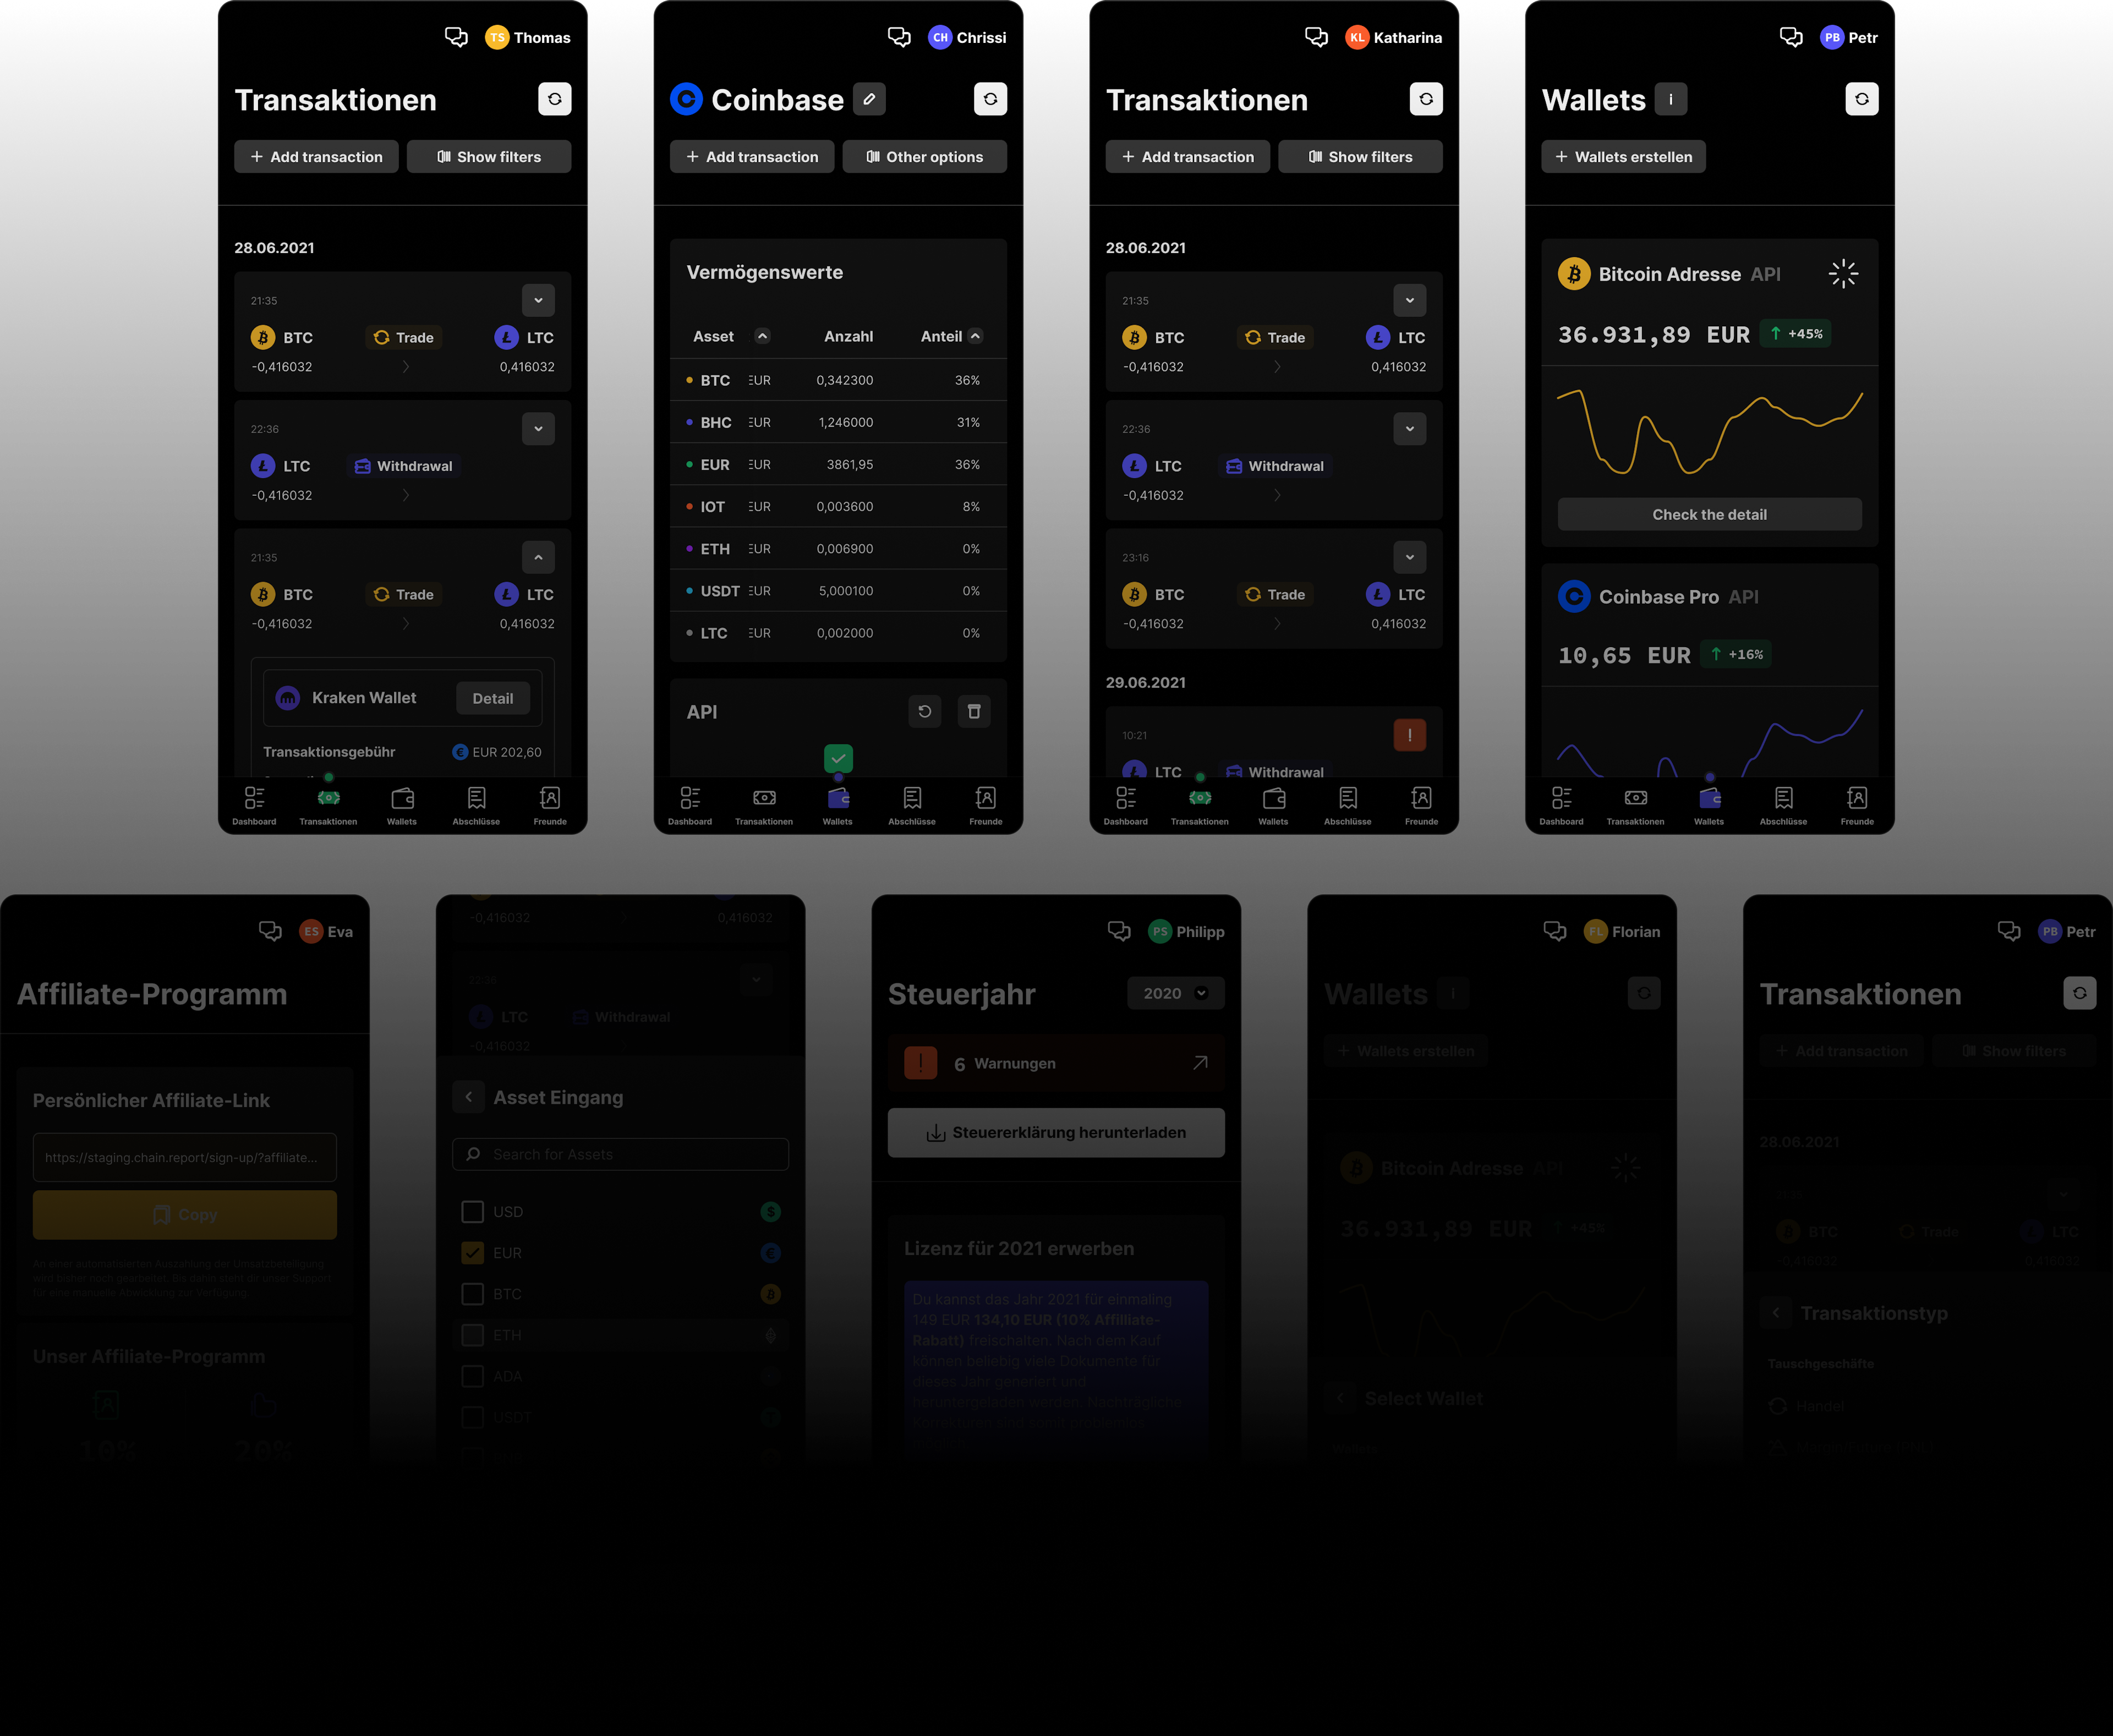 A variety of mobile app screens